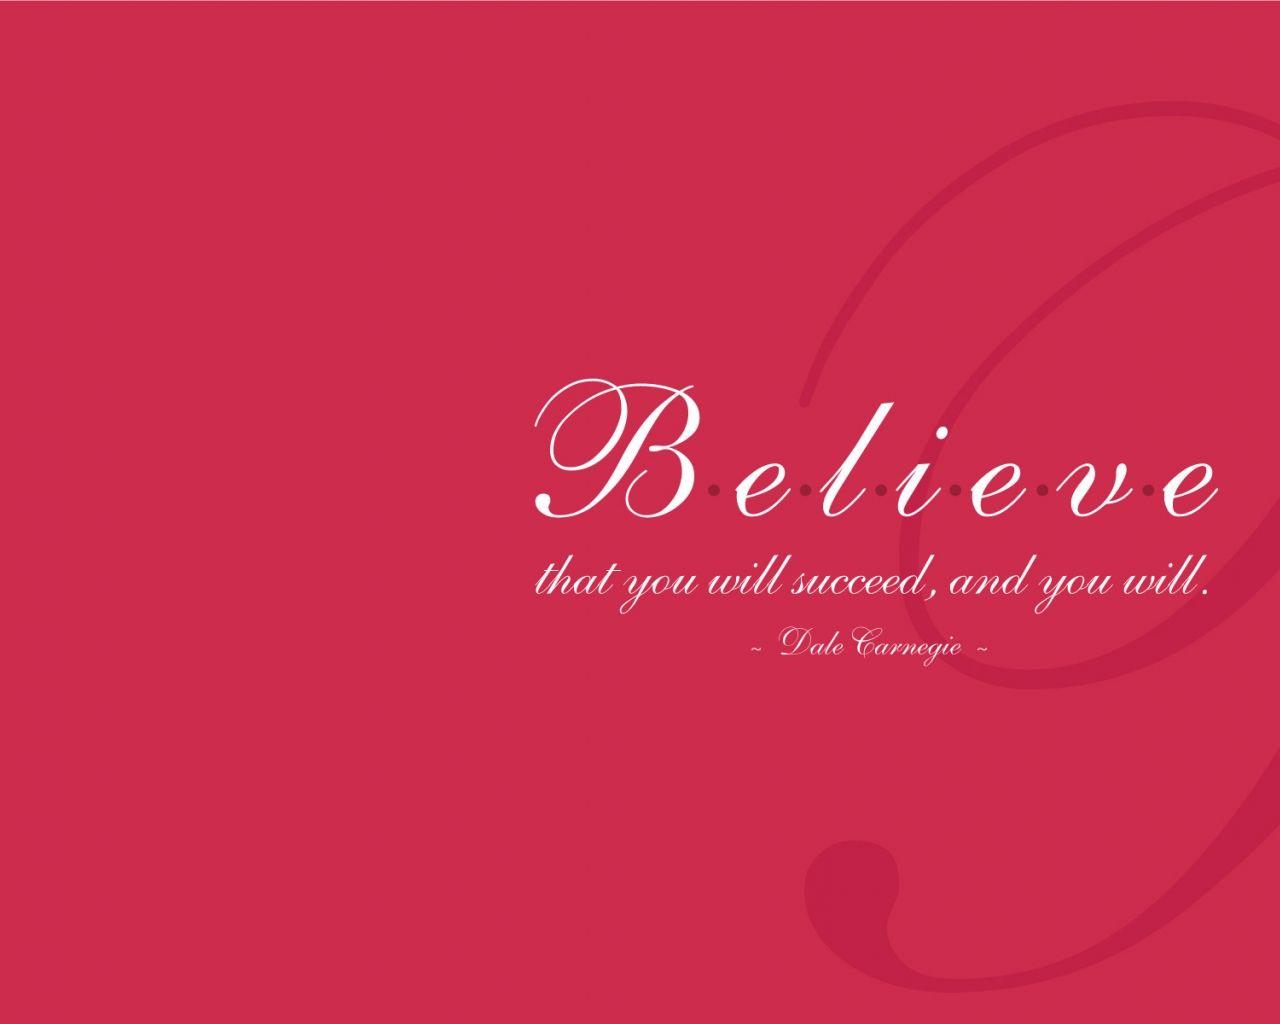 Business Quotes Wallpapers - Top Free Business Quotes Backgrounds ...